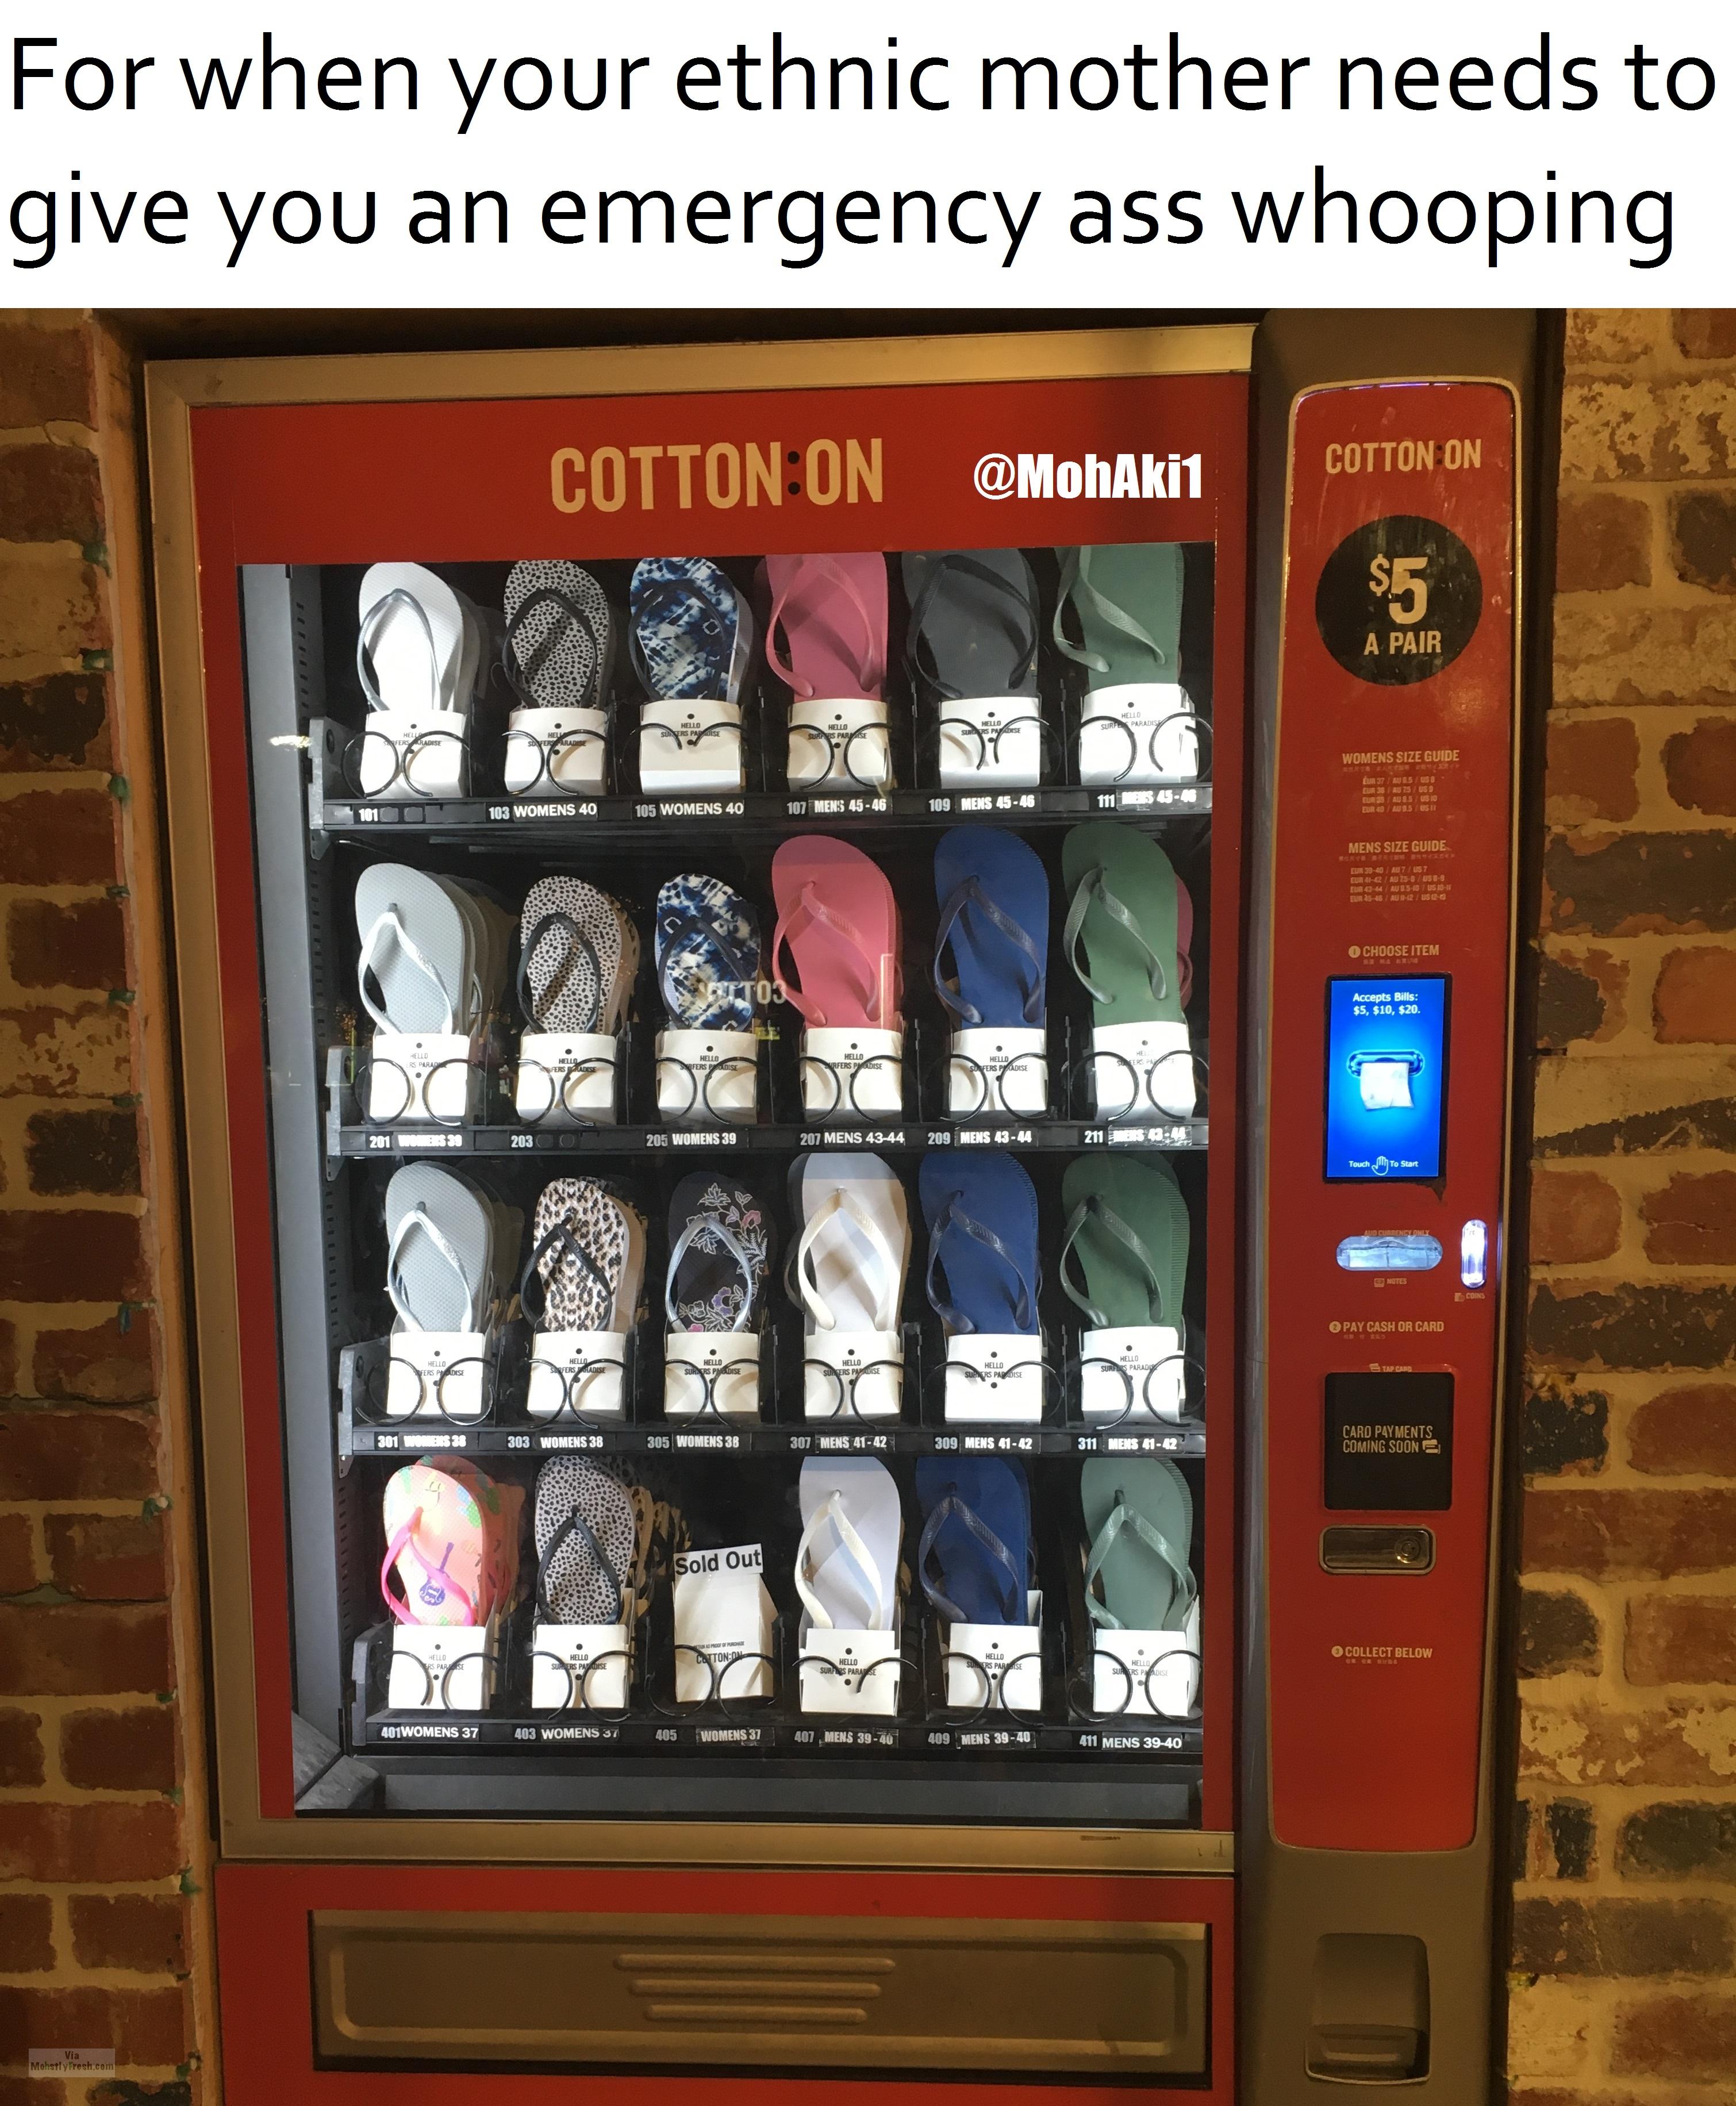 savage meme of flip flop vending machine joked as a way for ethnic mothers to give emergency ass whopping